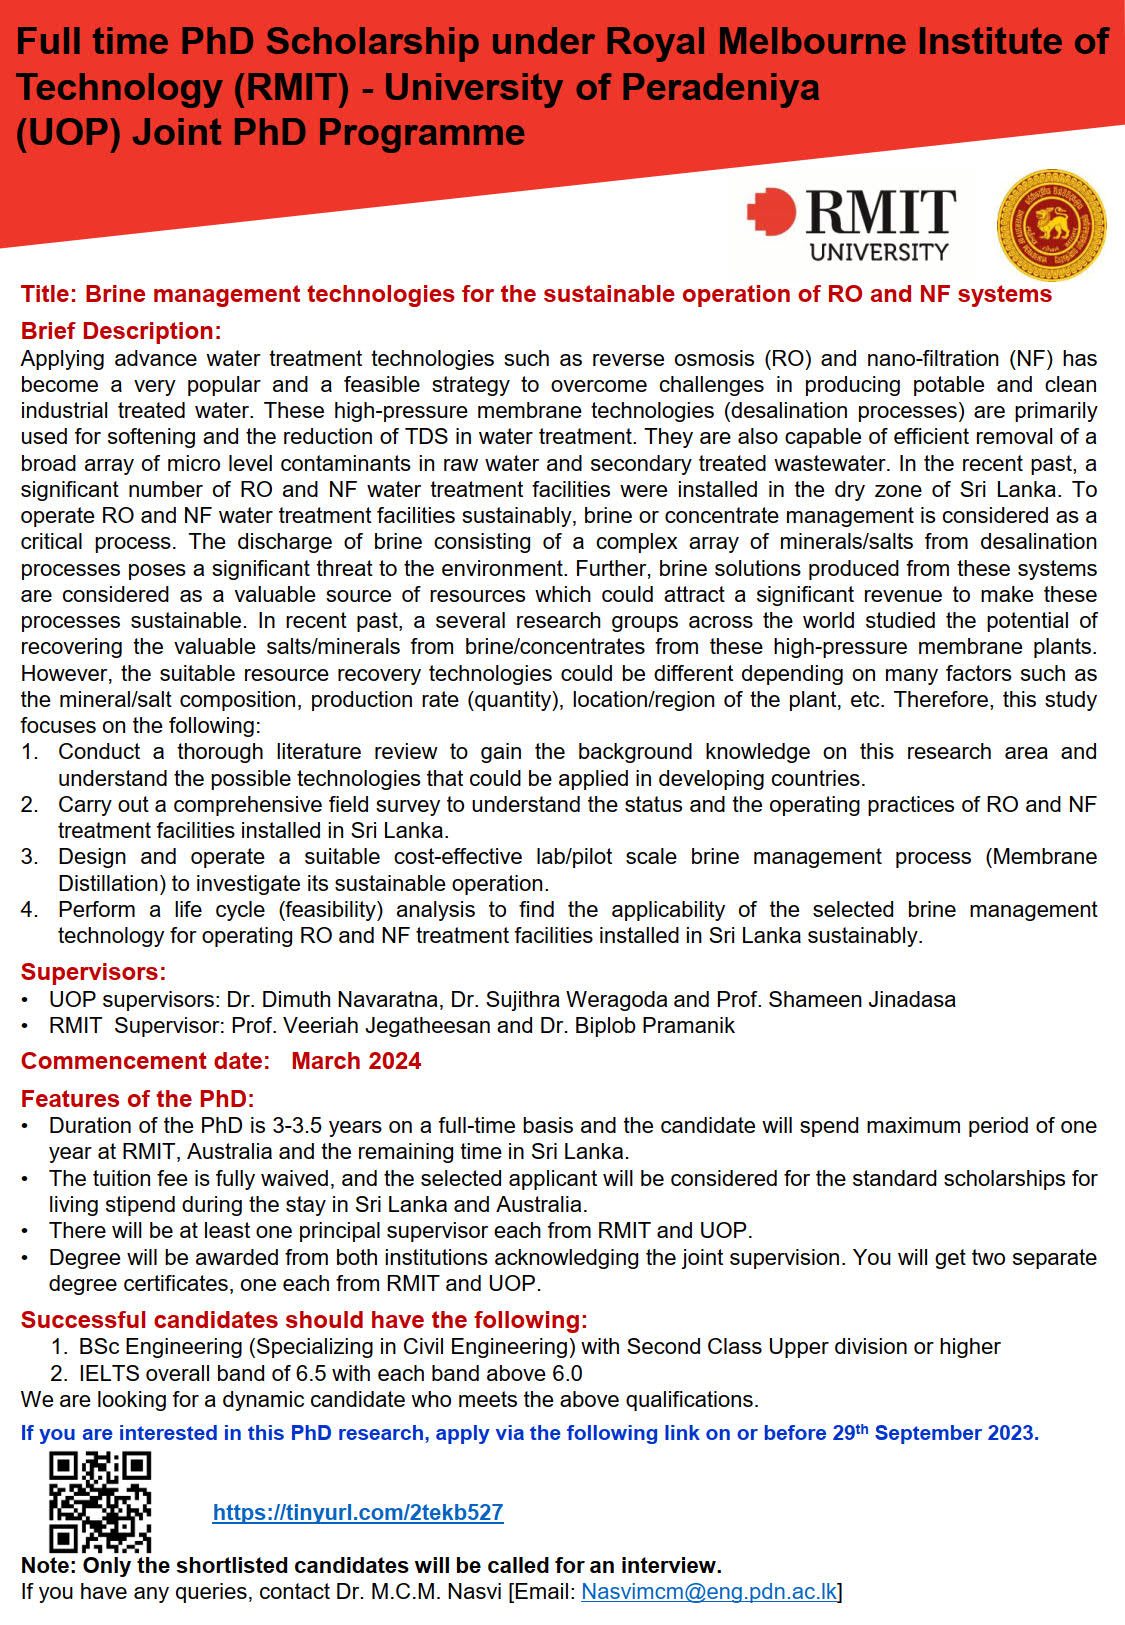 Full time PhD Scholarship-RMIT and UOP- Brine management technologies for the sustainable operation ....